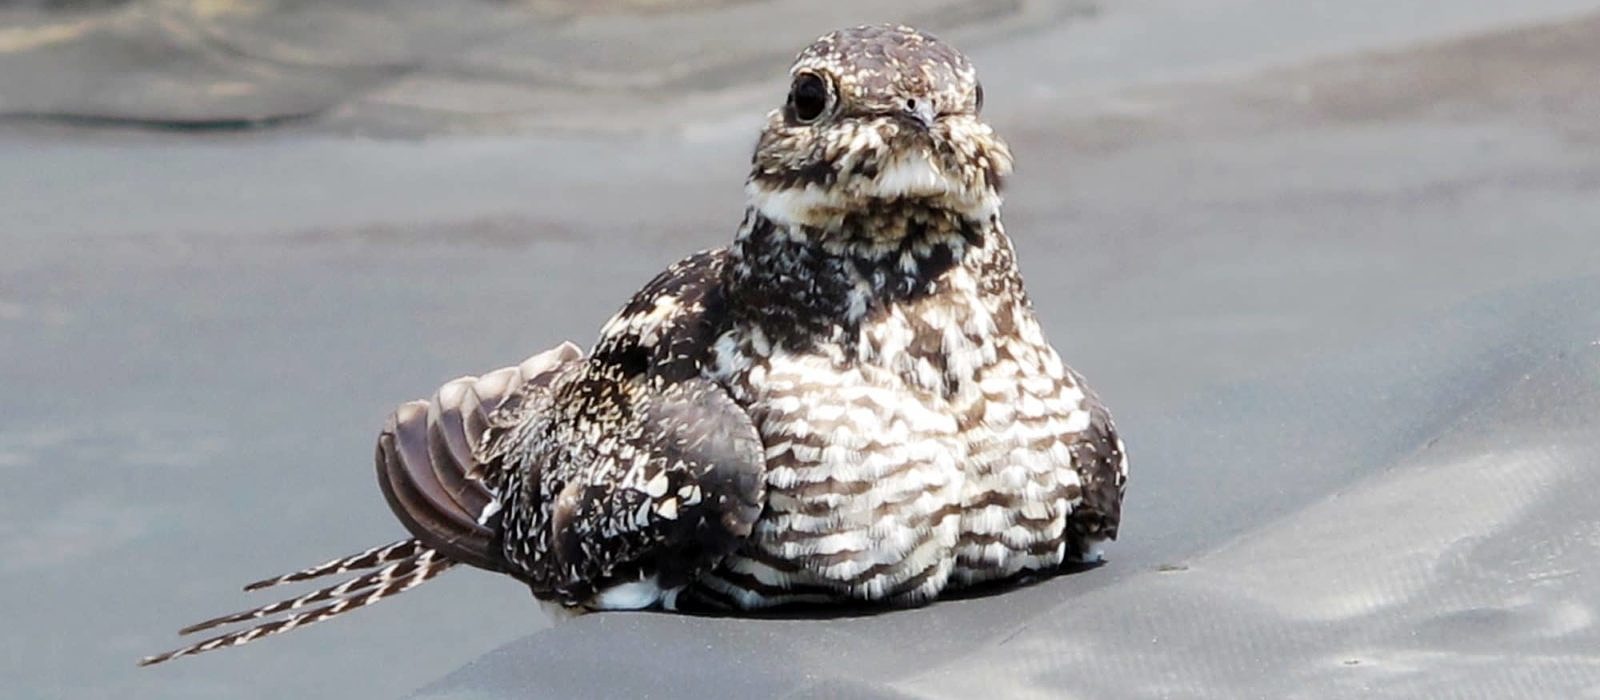 A female Common Nighthawk keeps sharp watch over her rooftop nest. (photo © Brett Amy Thelen)